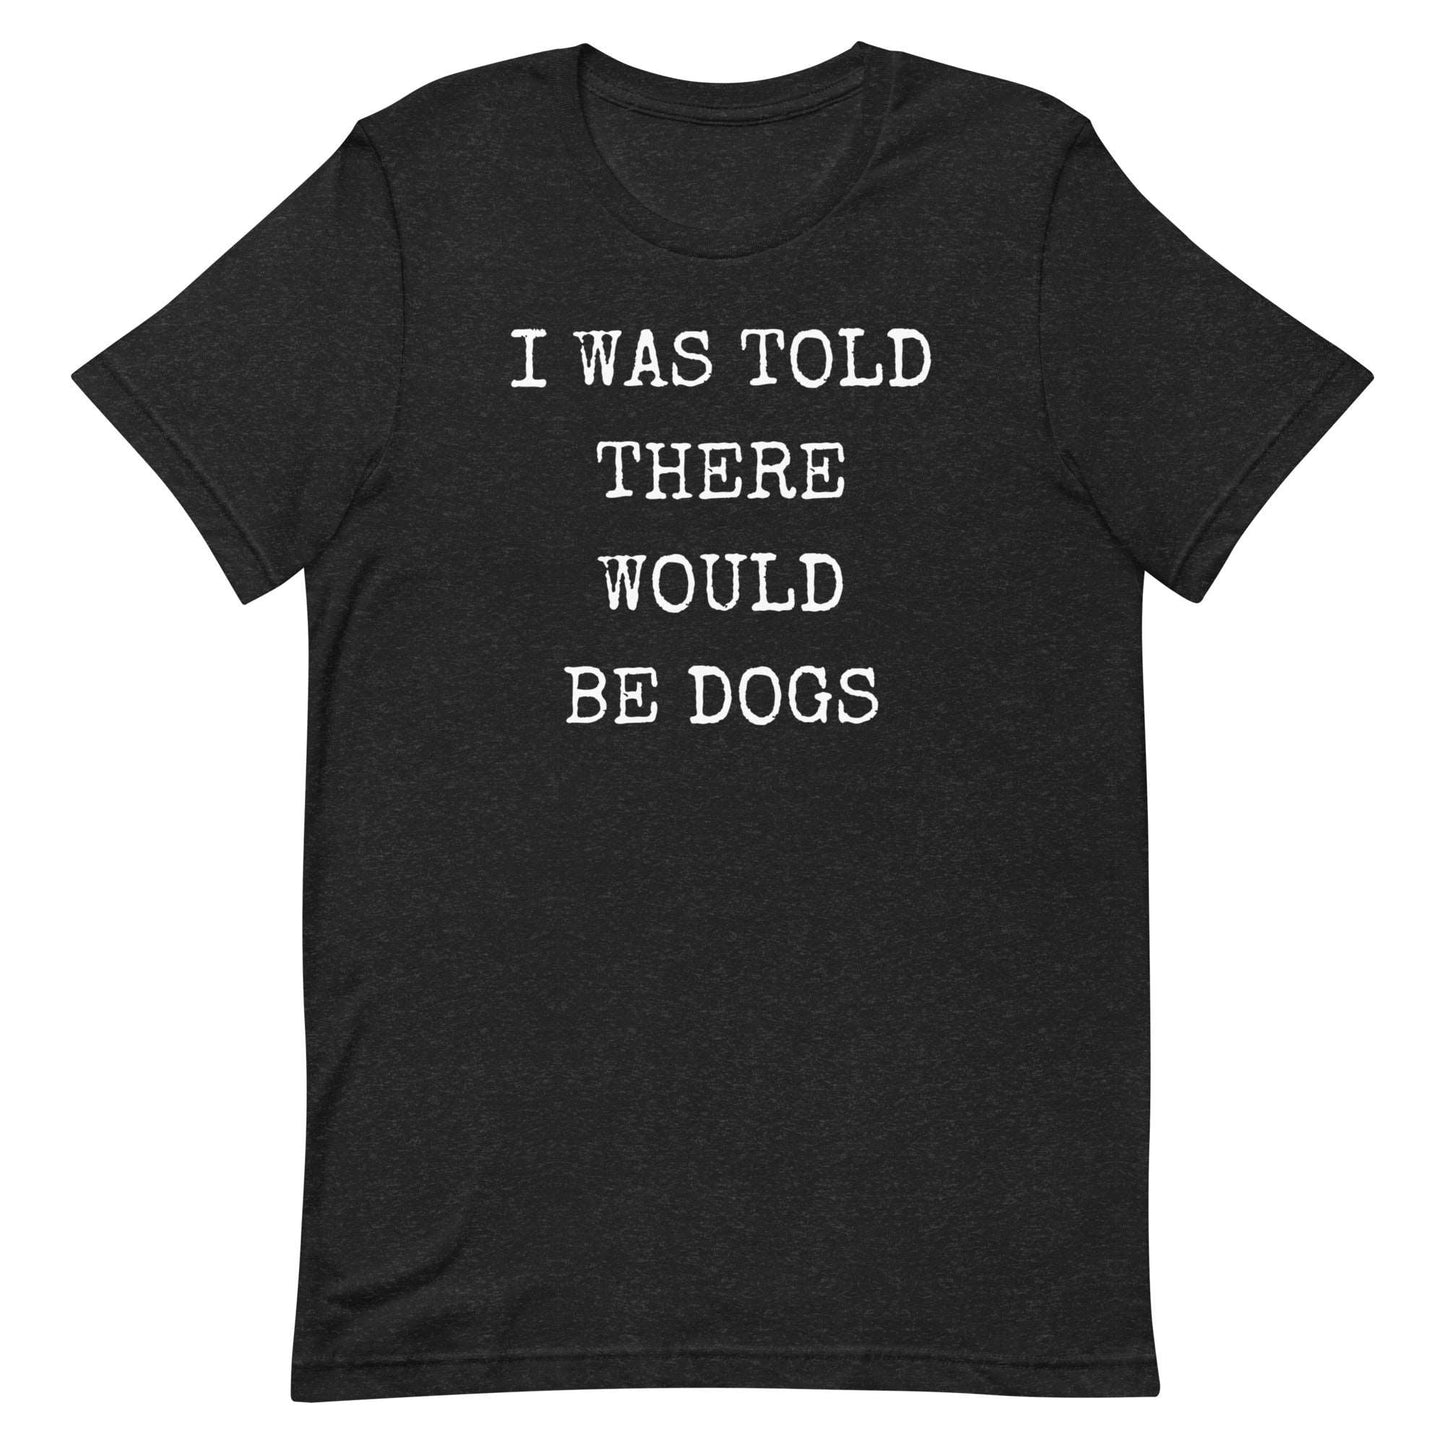 I was told there would be dogs Unisex t-shirt